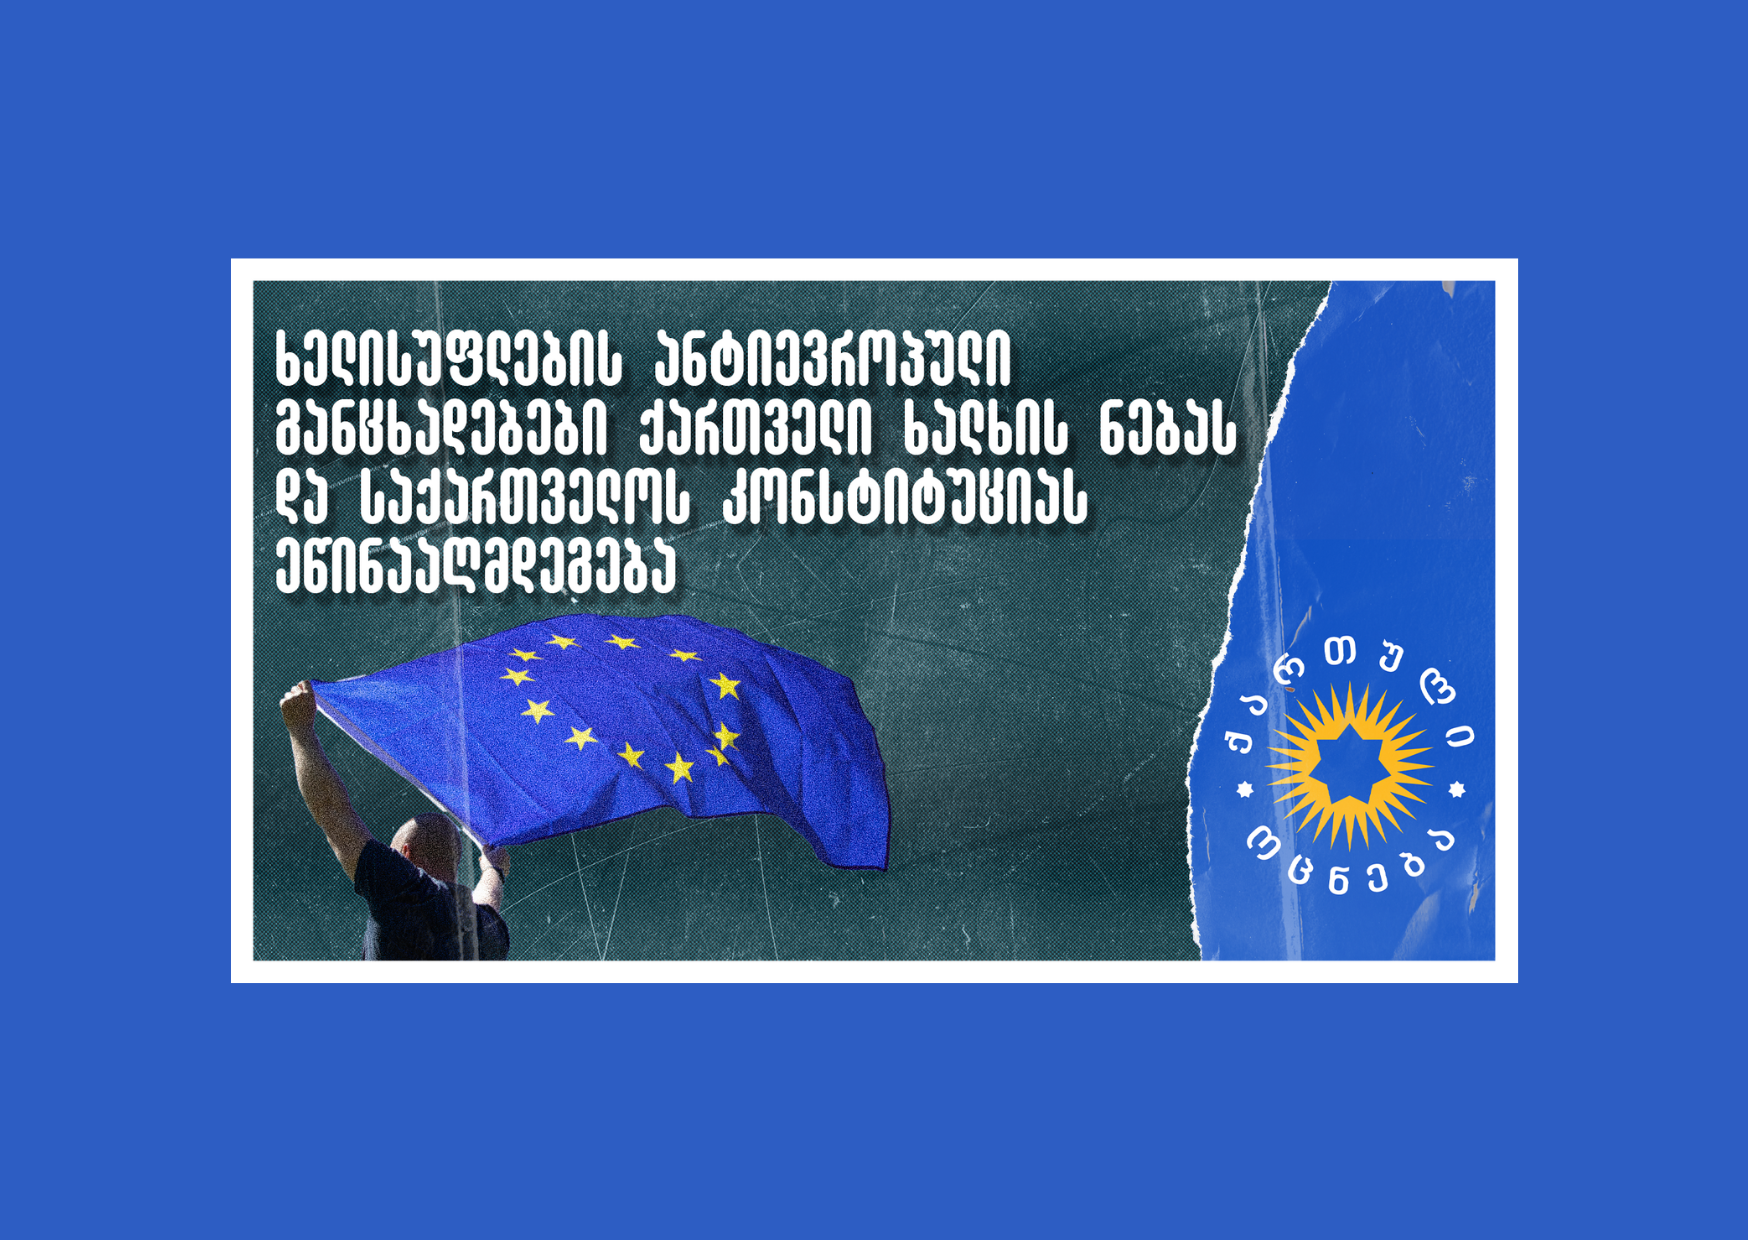 joint statement of organizations.: "The government's anti-EU statements contradict the will of the Georgian people and the Constitution of Georgia"